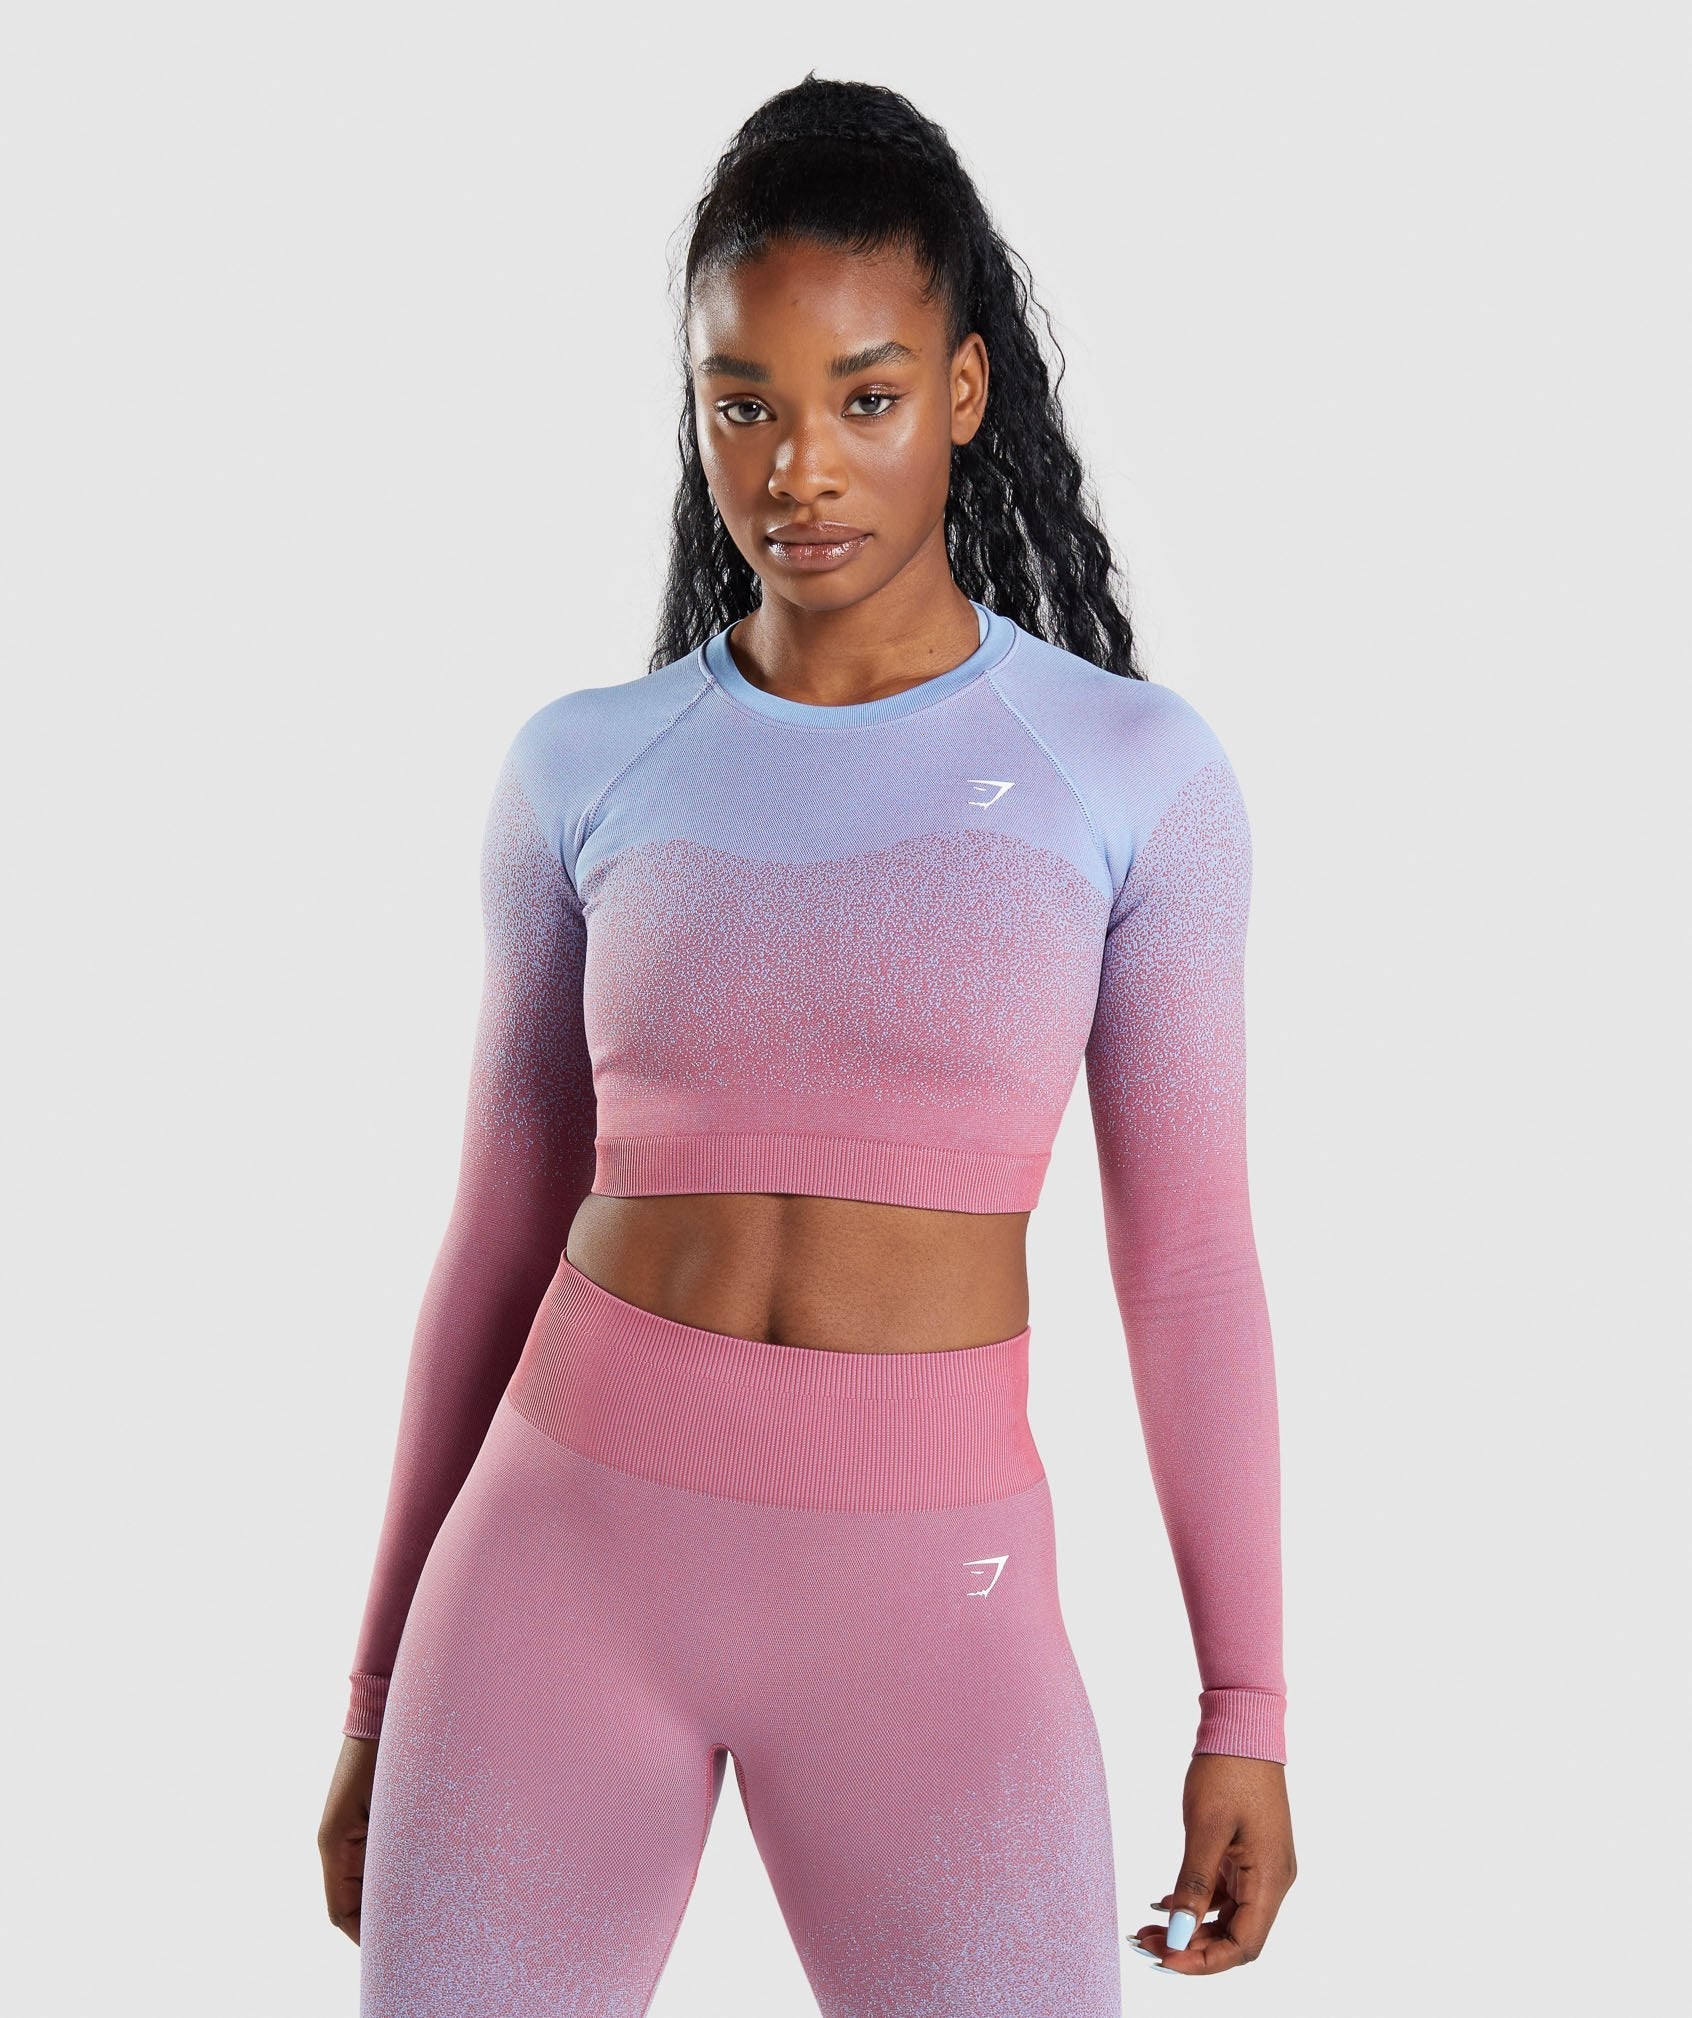 Adapt Ombre Seamless Long Sleeve Crop Top in Rose Pink/Light Blue - view 1